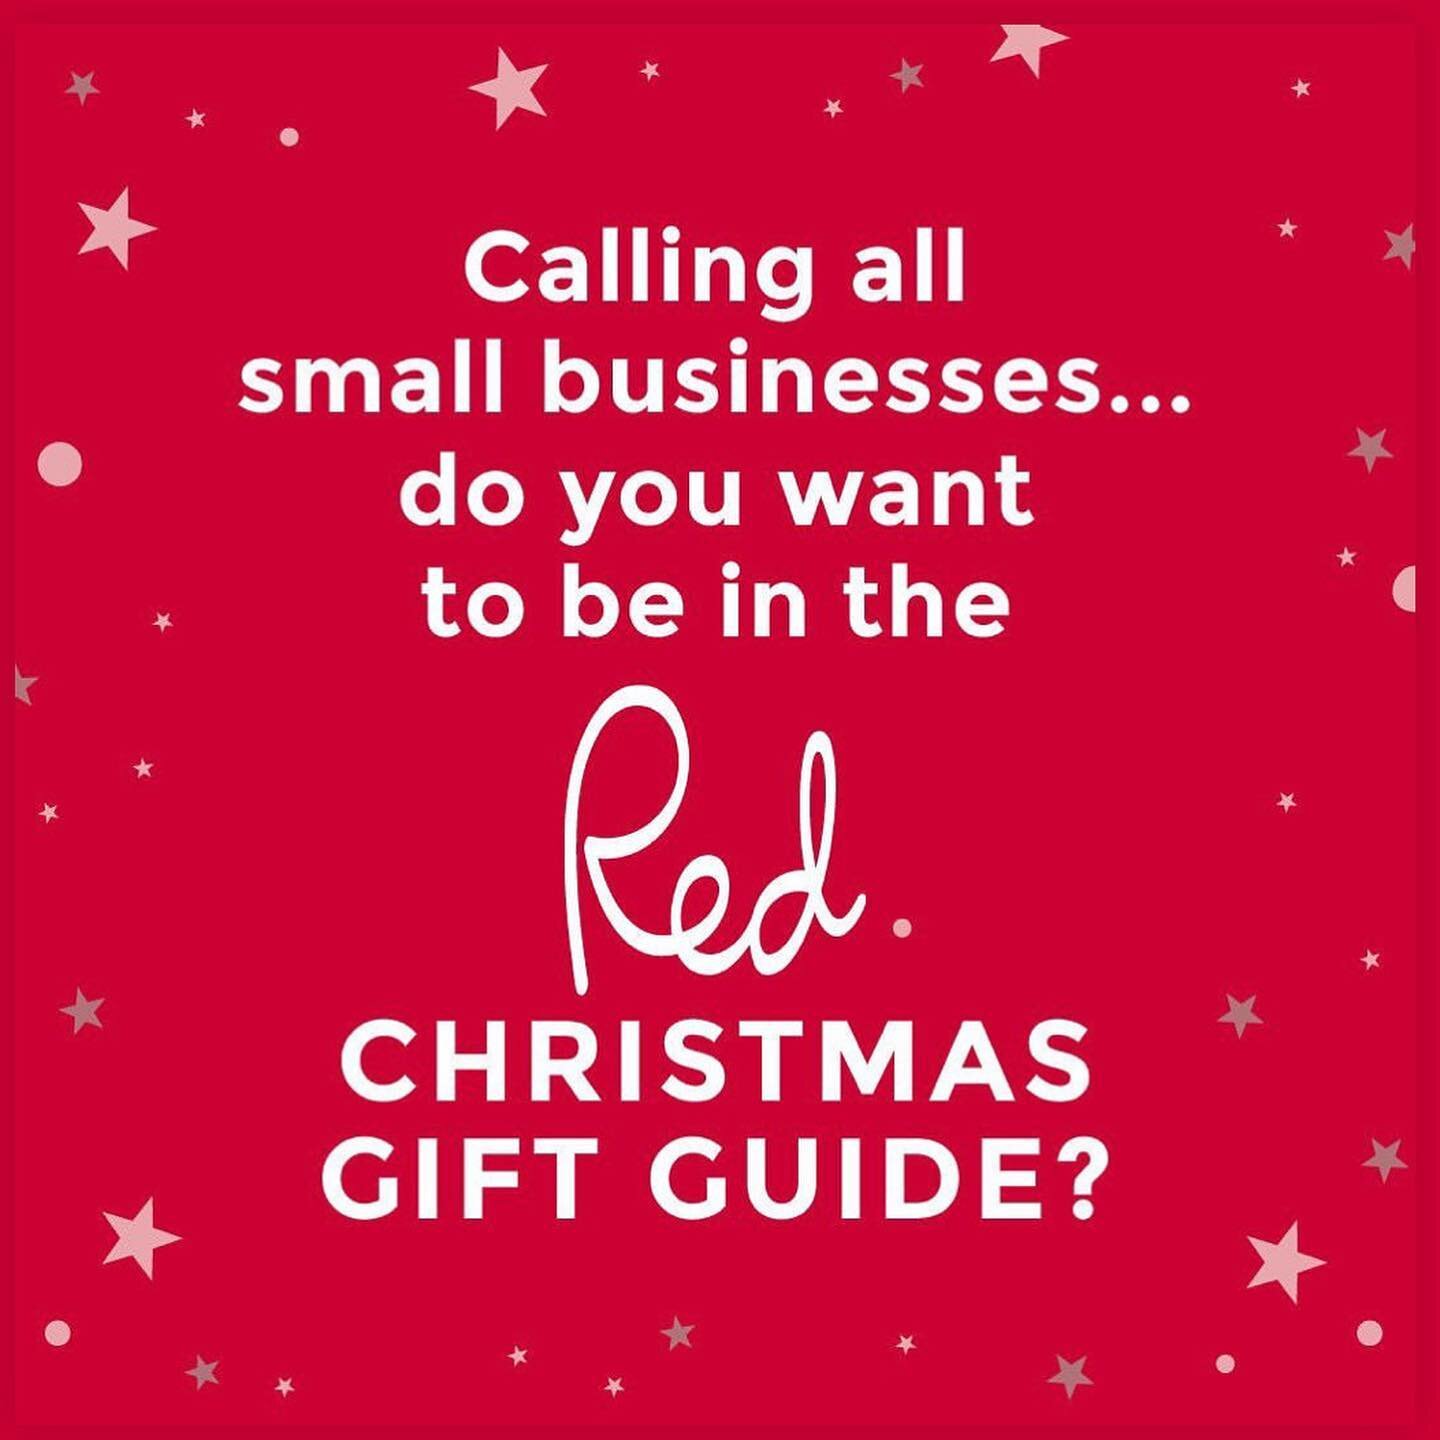 Get involved! @redmagazine want YOU to pitch your products for their gift guides! 🥳

Swipe for the details and head to the link in the bio for all the submission details 🎁
.
.
.
.
#theprspotlight #christmaspr #christmasinjuly #christmasgiftguide #c